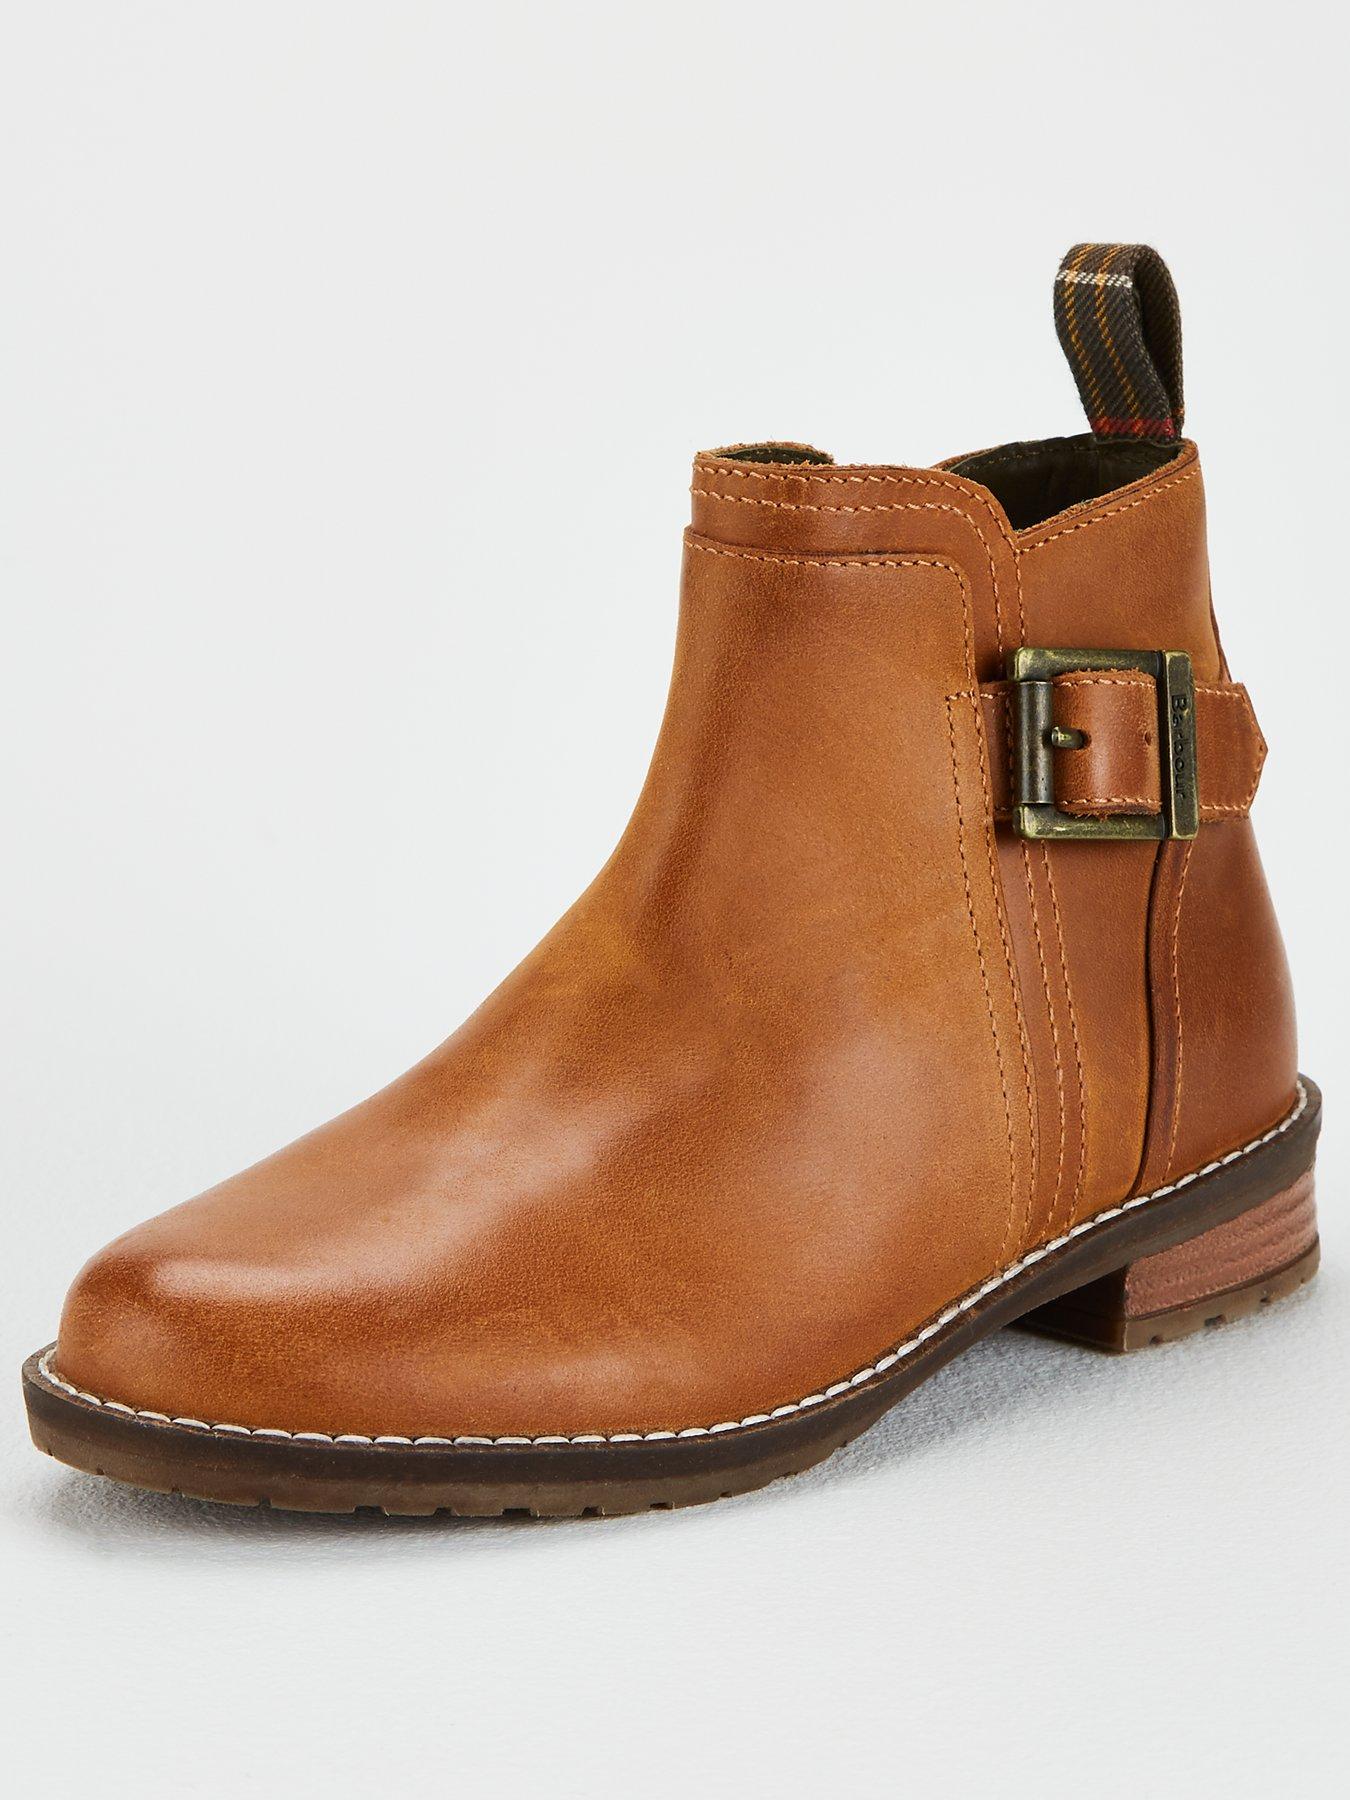 tan leather ankle boots uk